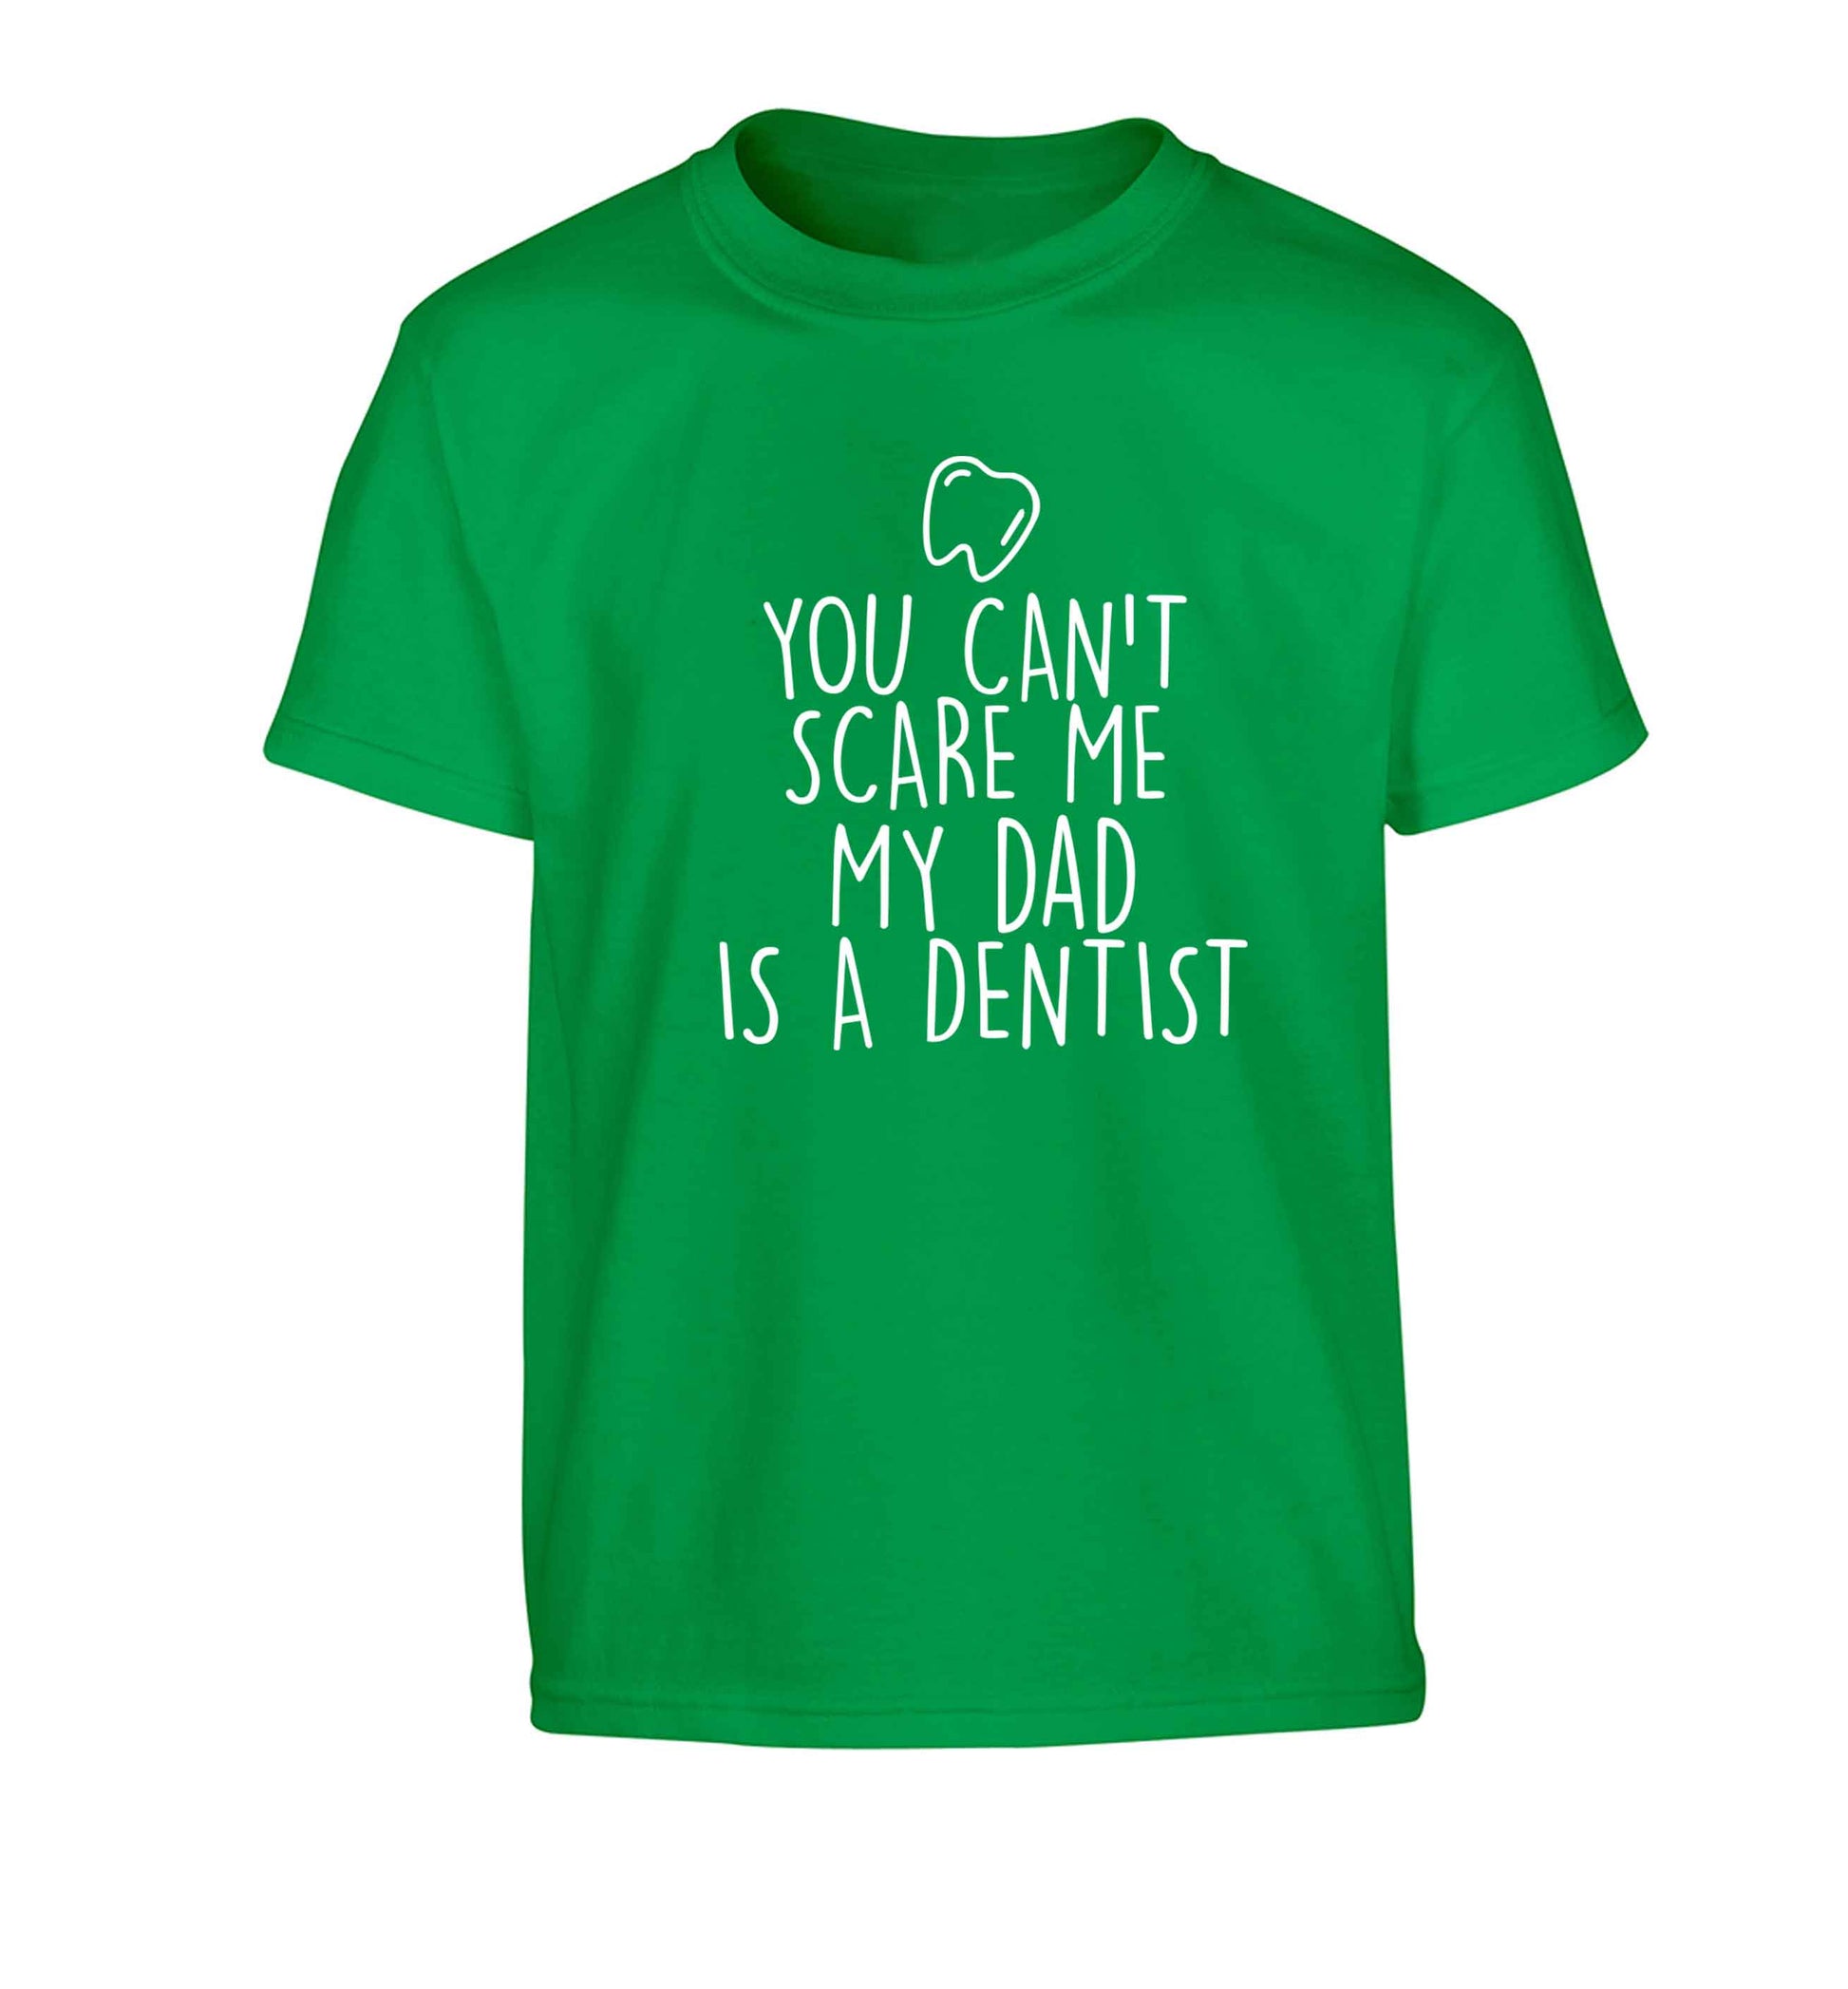 You can't scare me my dad is a dentist Children's green Tshirt 12-13 Years